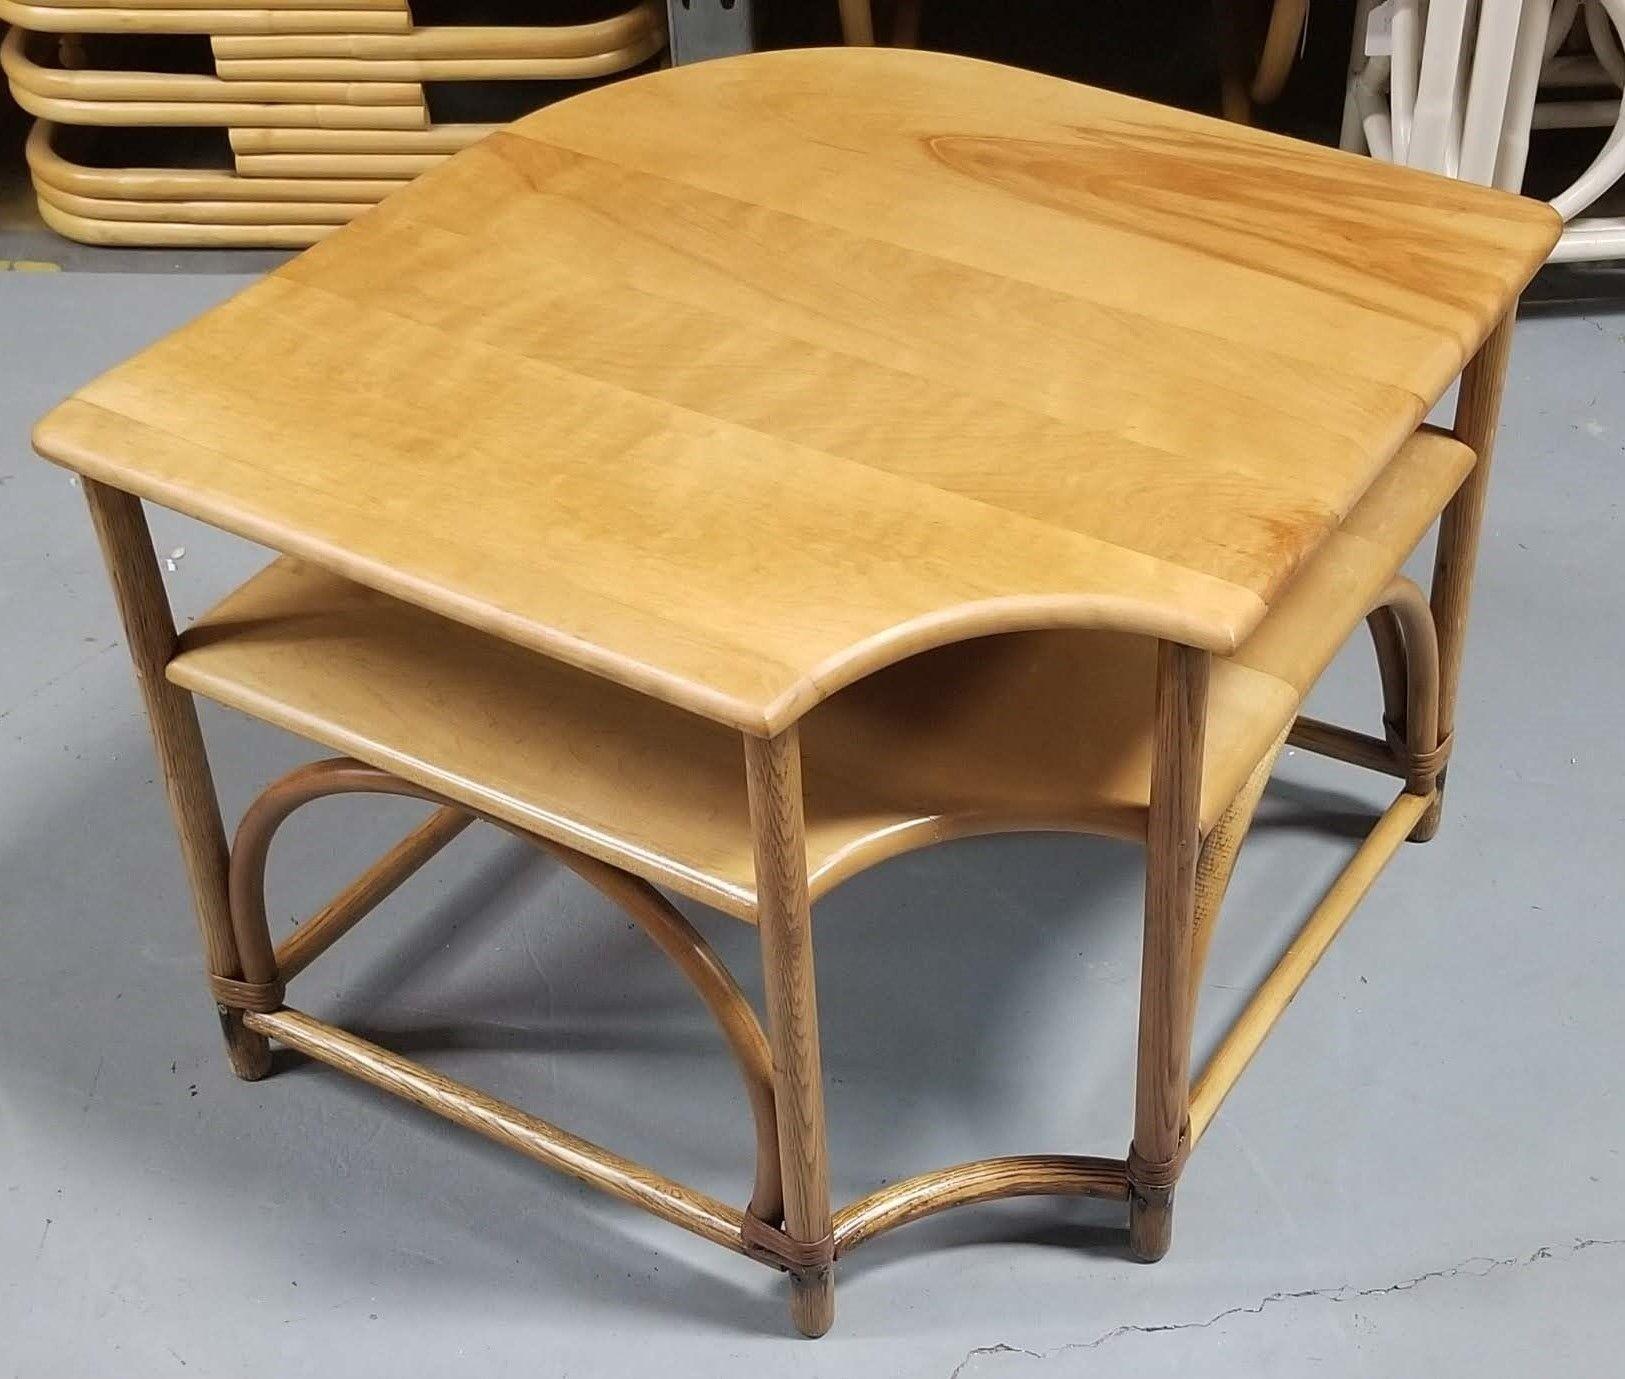 Restored Mid Century Maple corner table by Heywood Wakefield with Faux Rattan single strand legs made of oak and a cut out corner to fit your unique interior needs or to feature Wakefield's original mid century design.

WWII Era, Circa 1950s,